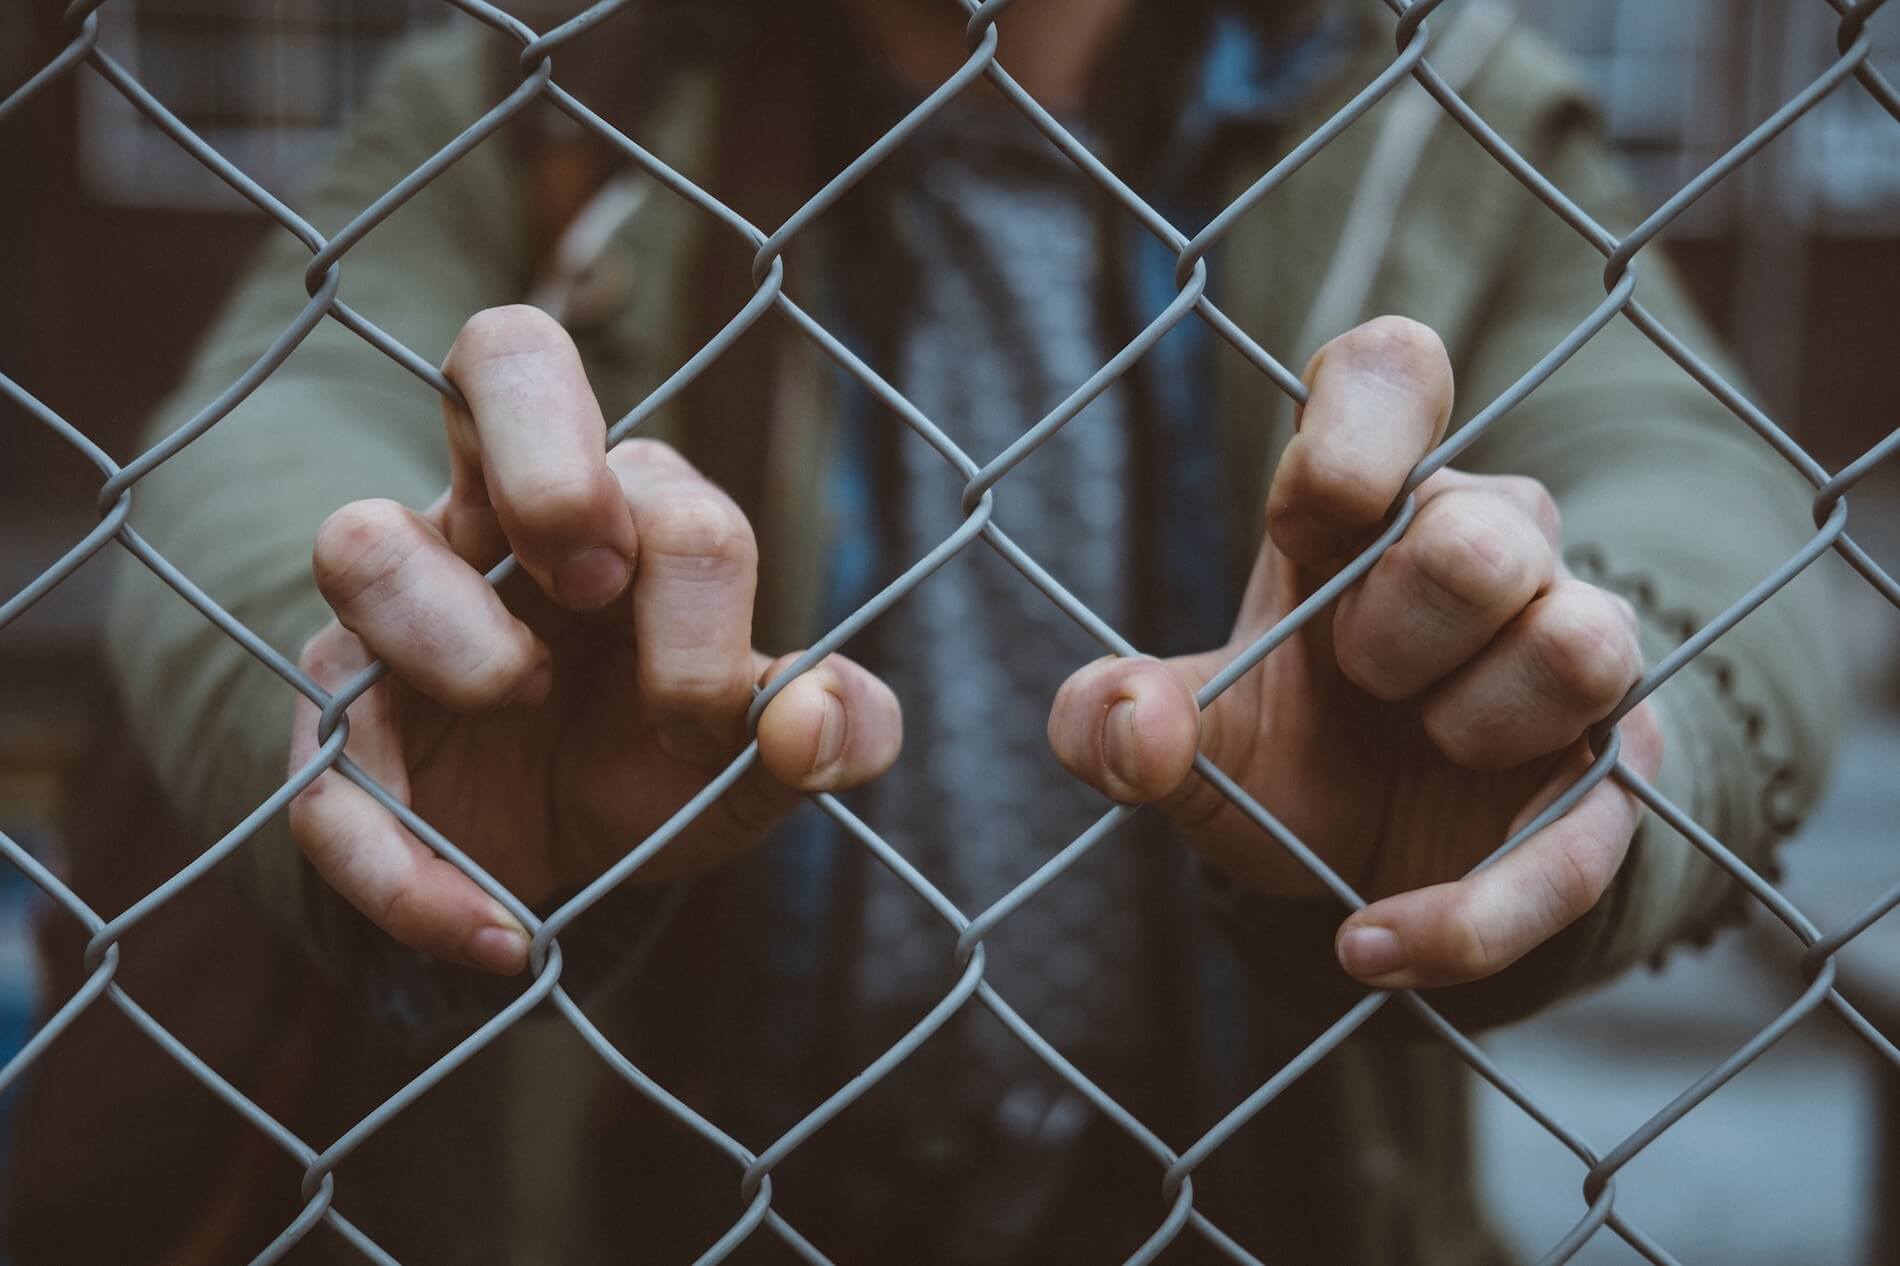 Blurry image of a torso in a beige jacket with his fingers gripping chain link fencing